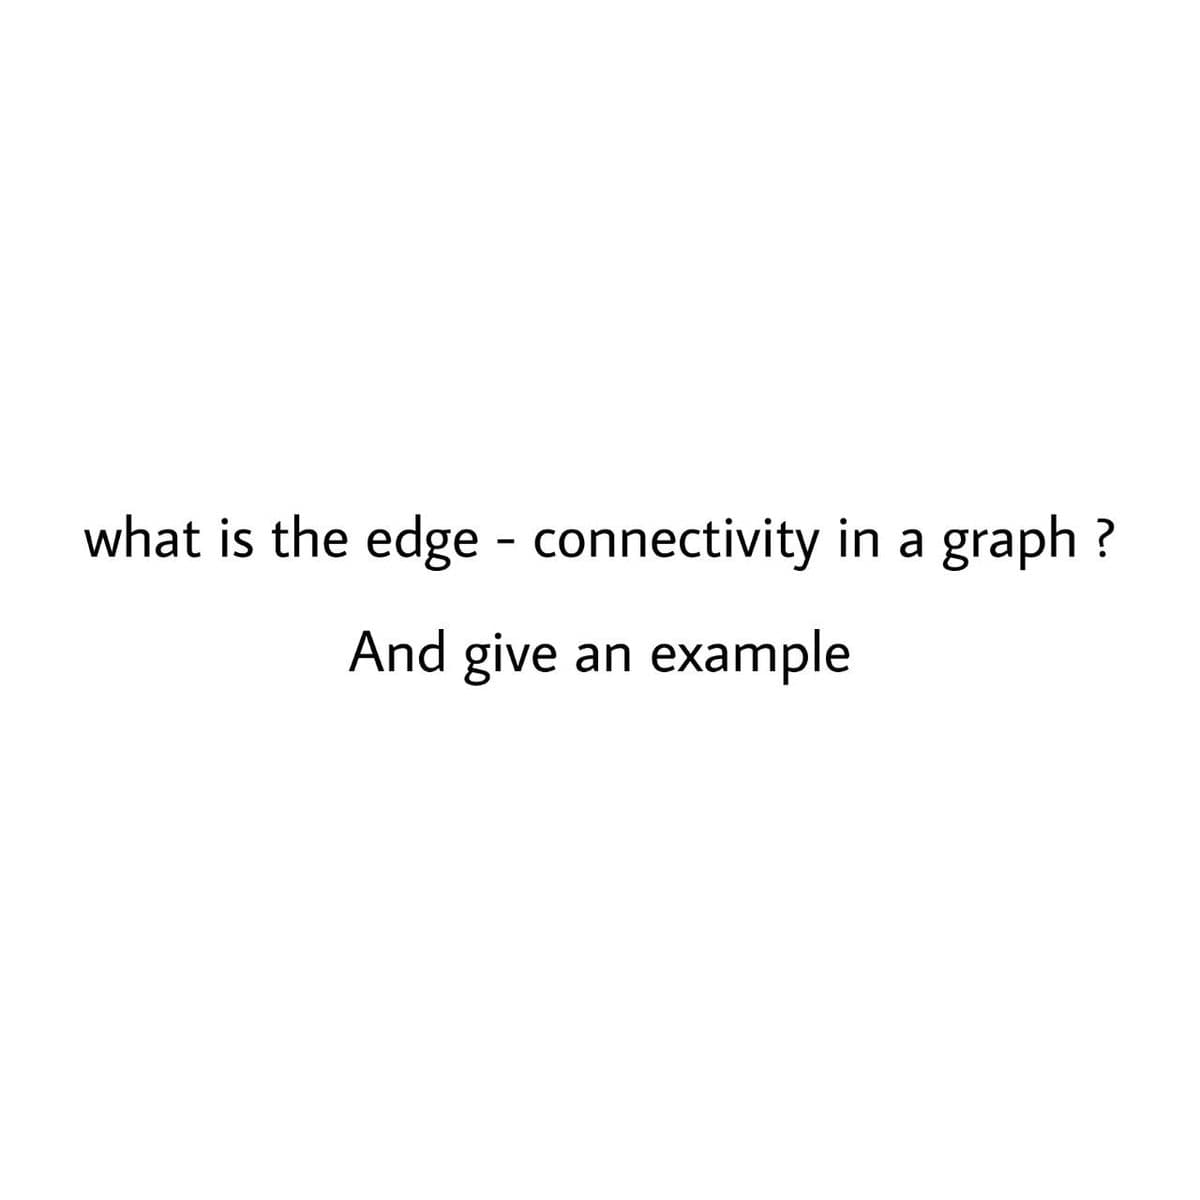 what is the edge - connectivity in a graph ?
And give
example
an
